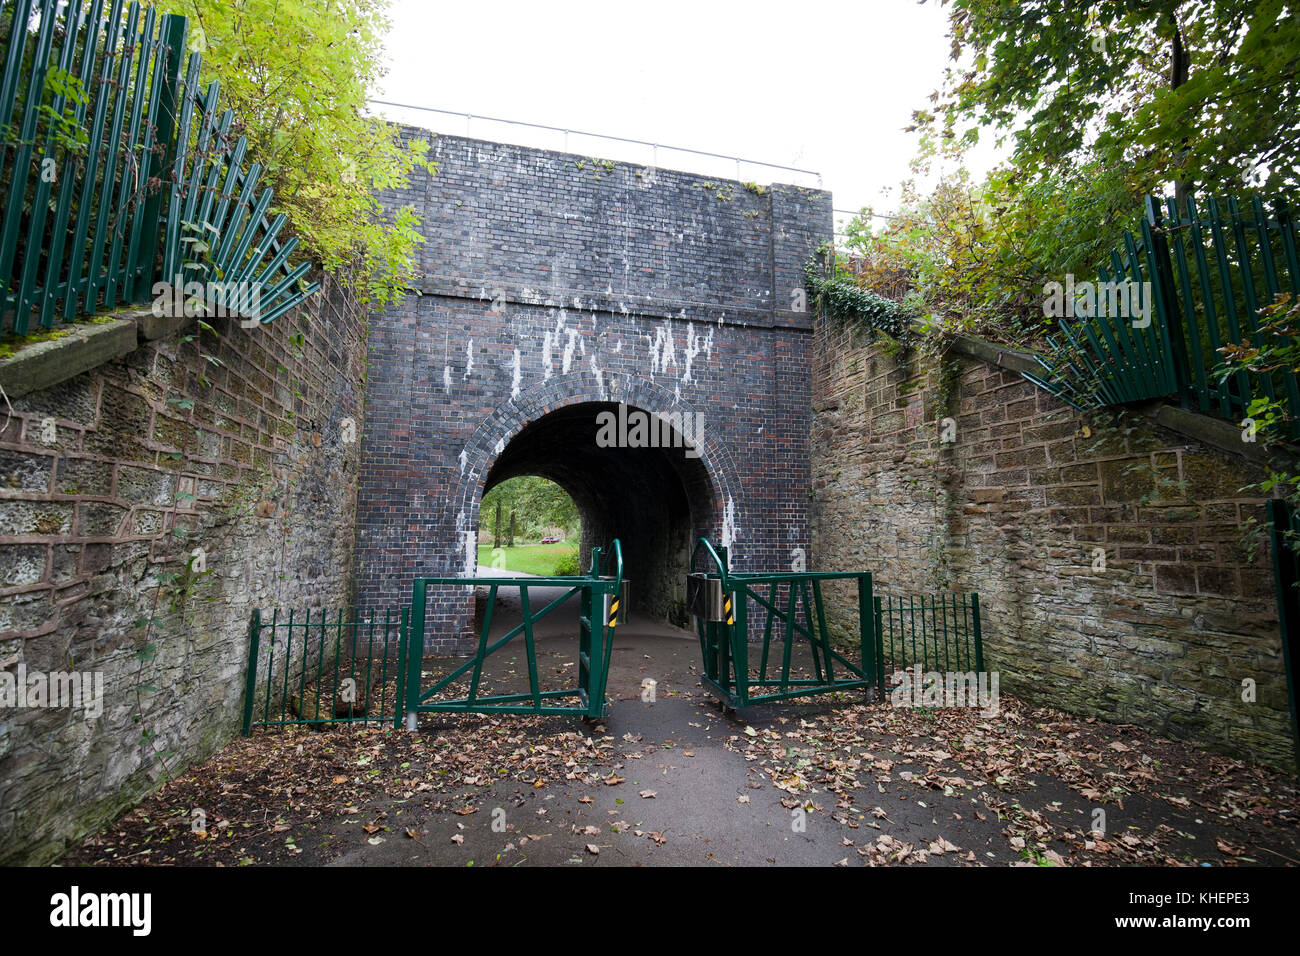 Stadt moers park, whiston, Knowsley, Merseyside, Regno Unito Foto Stock